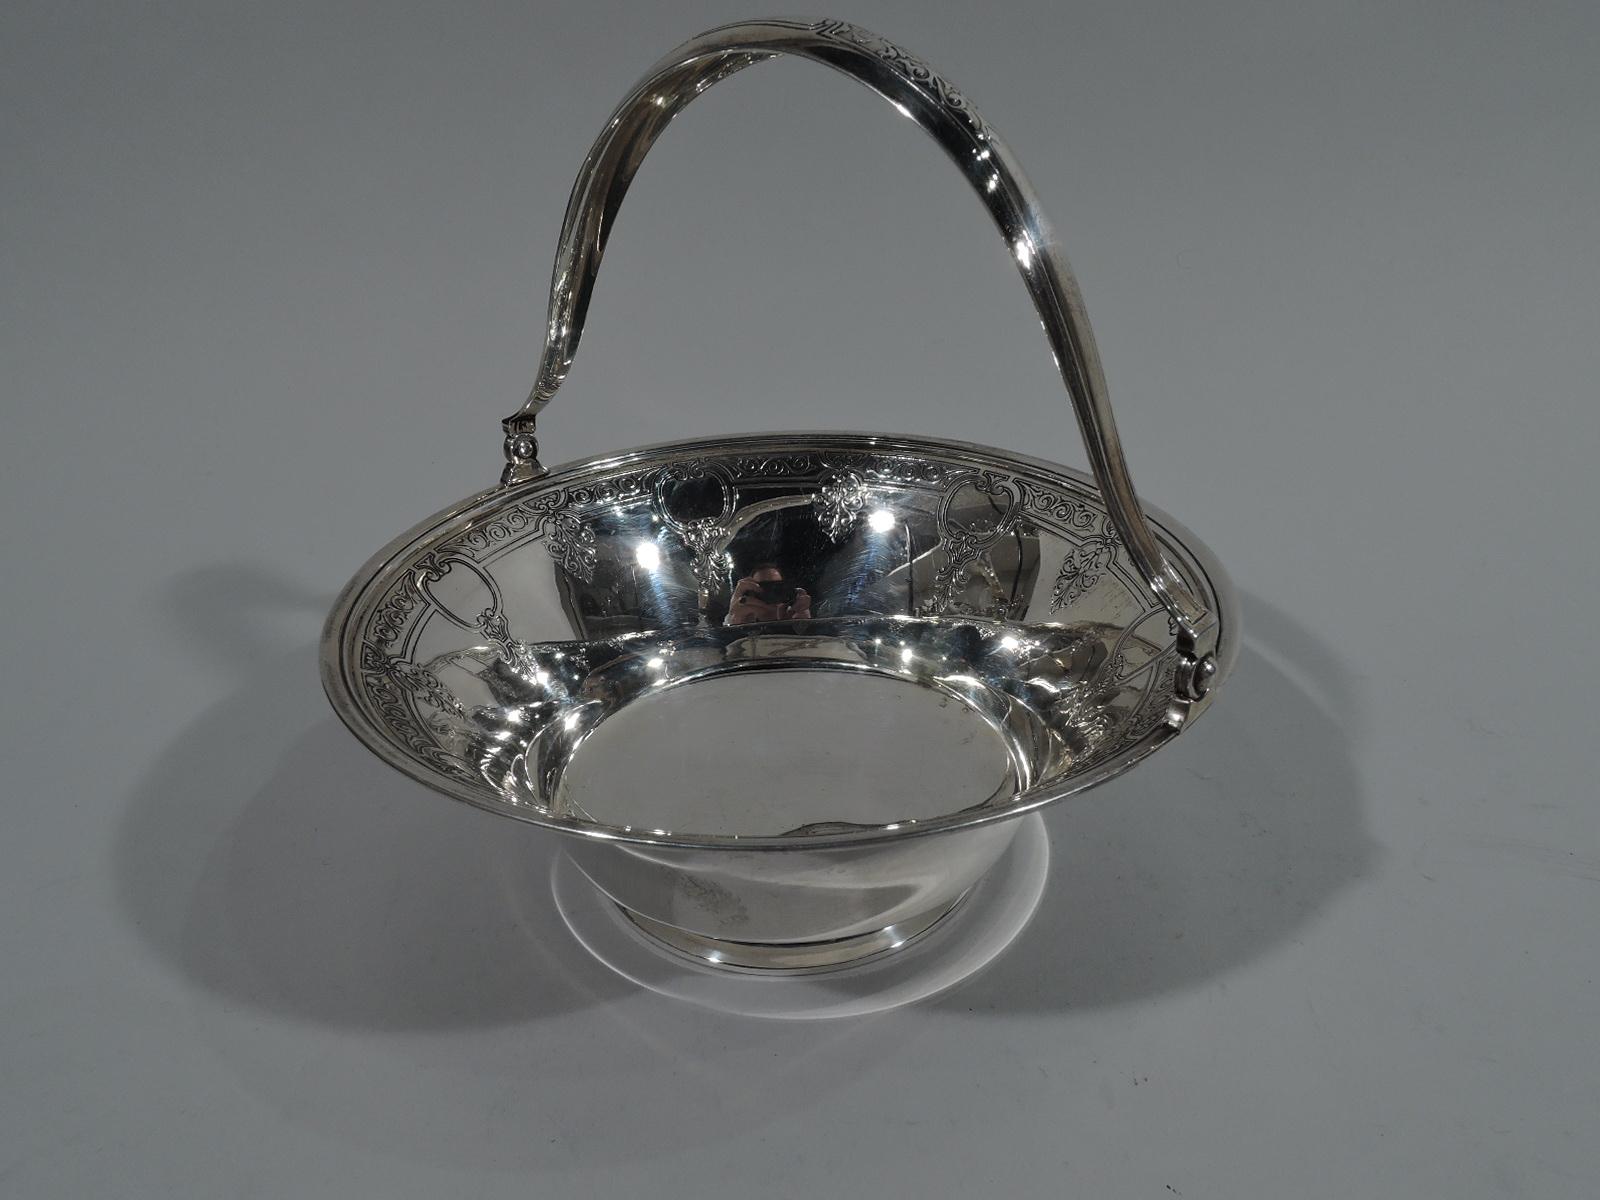 Classical sterling silver basket. Made by Tiffany & Co. in New York, circa 1915. Round and wide with tapering sides, raised foot, and bell-form swing handle. Acid etched ornament. On inerior scrolled border interspersed with alternating palmettes